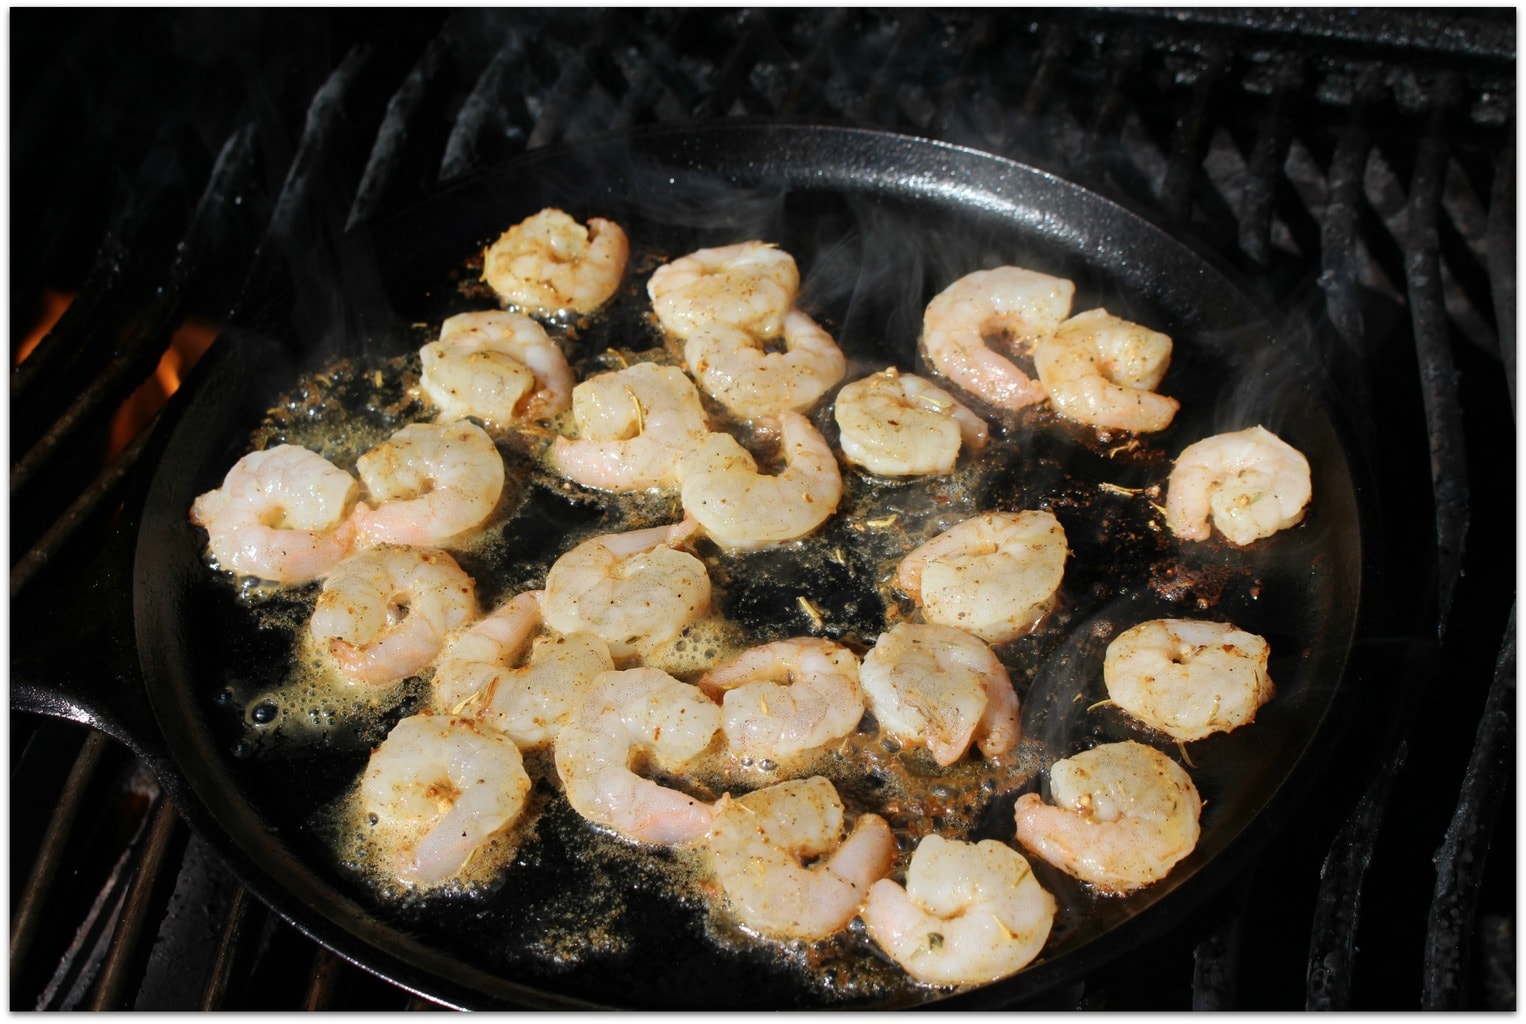 Shrimp in cast iron skillet on grill.